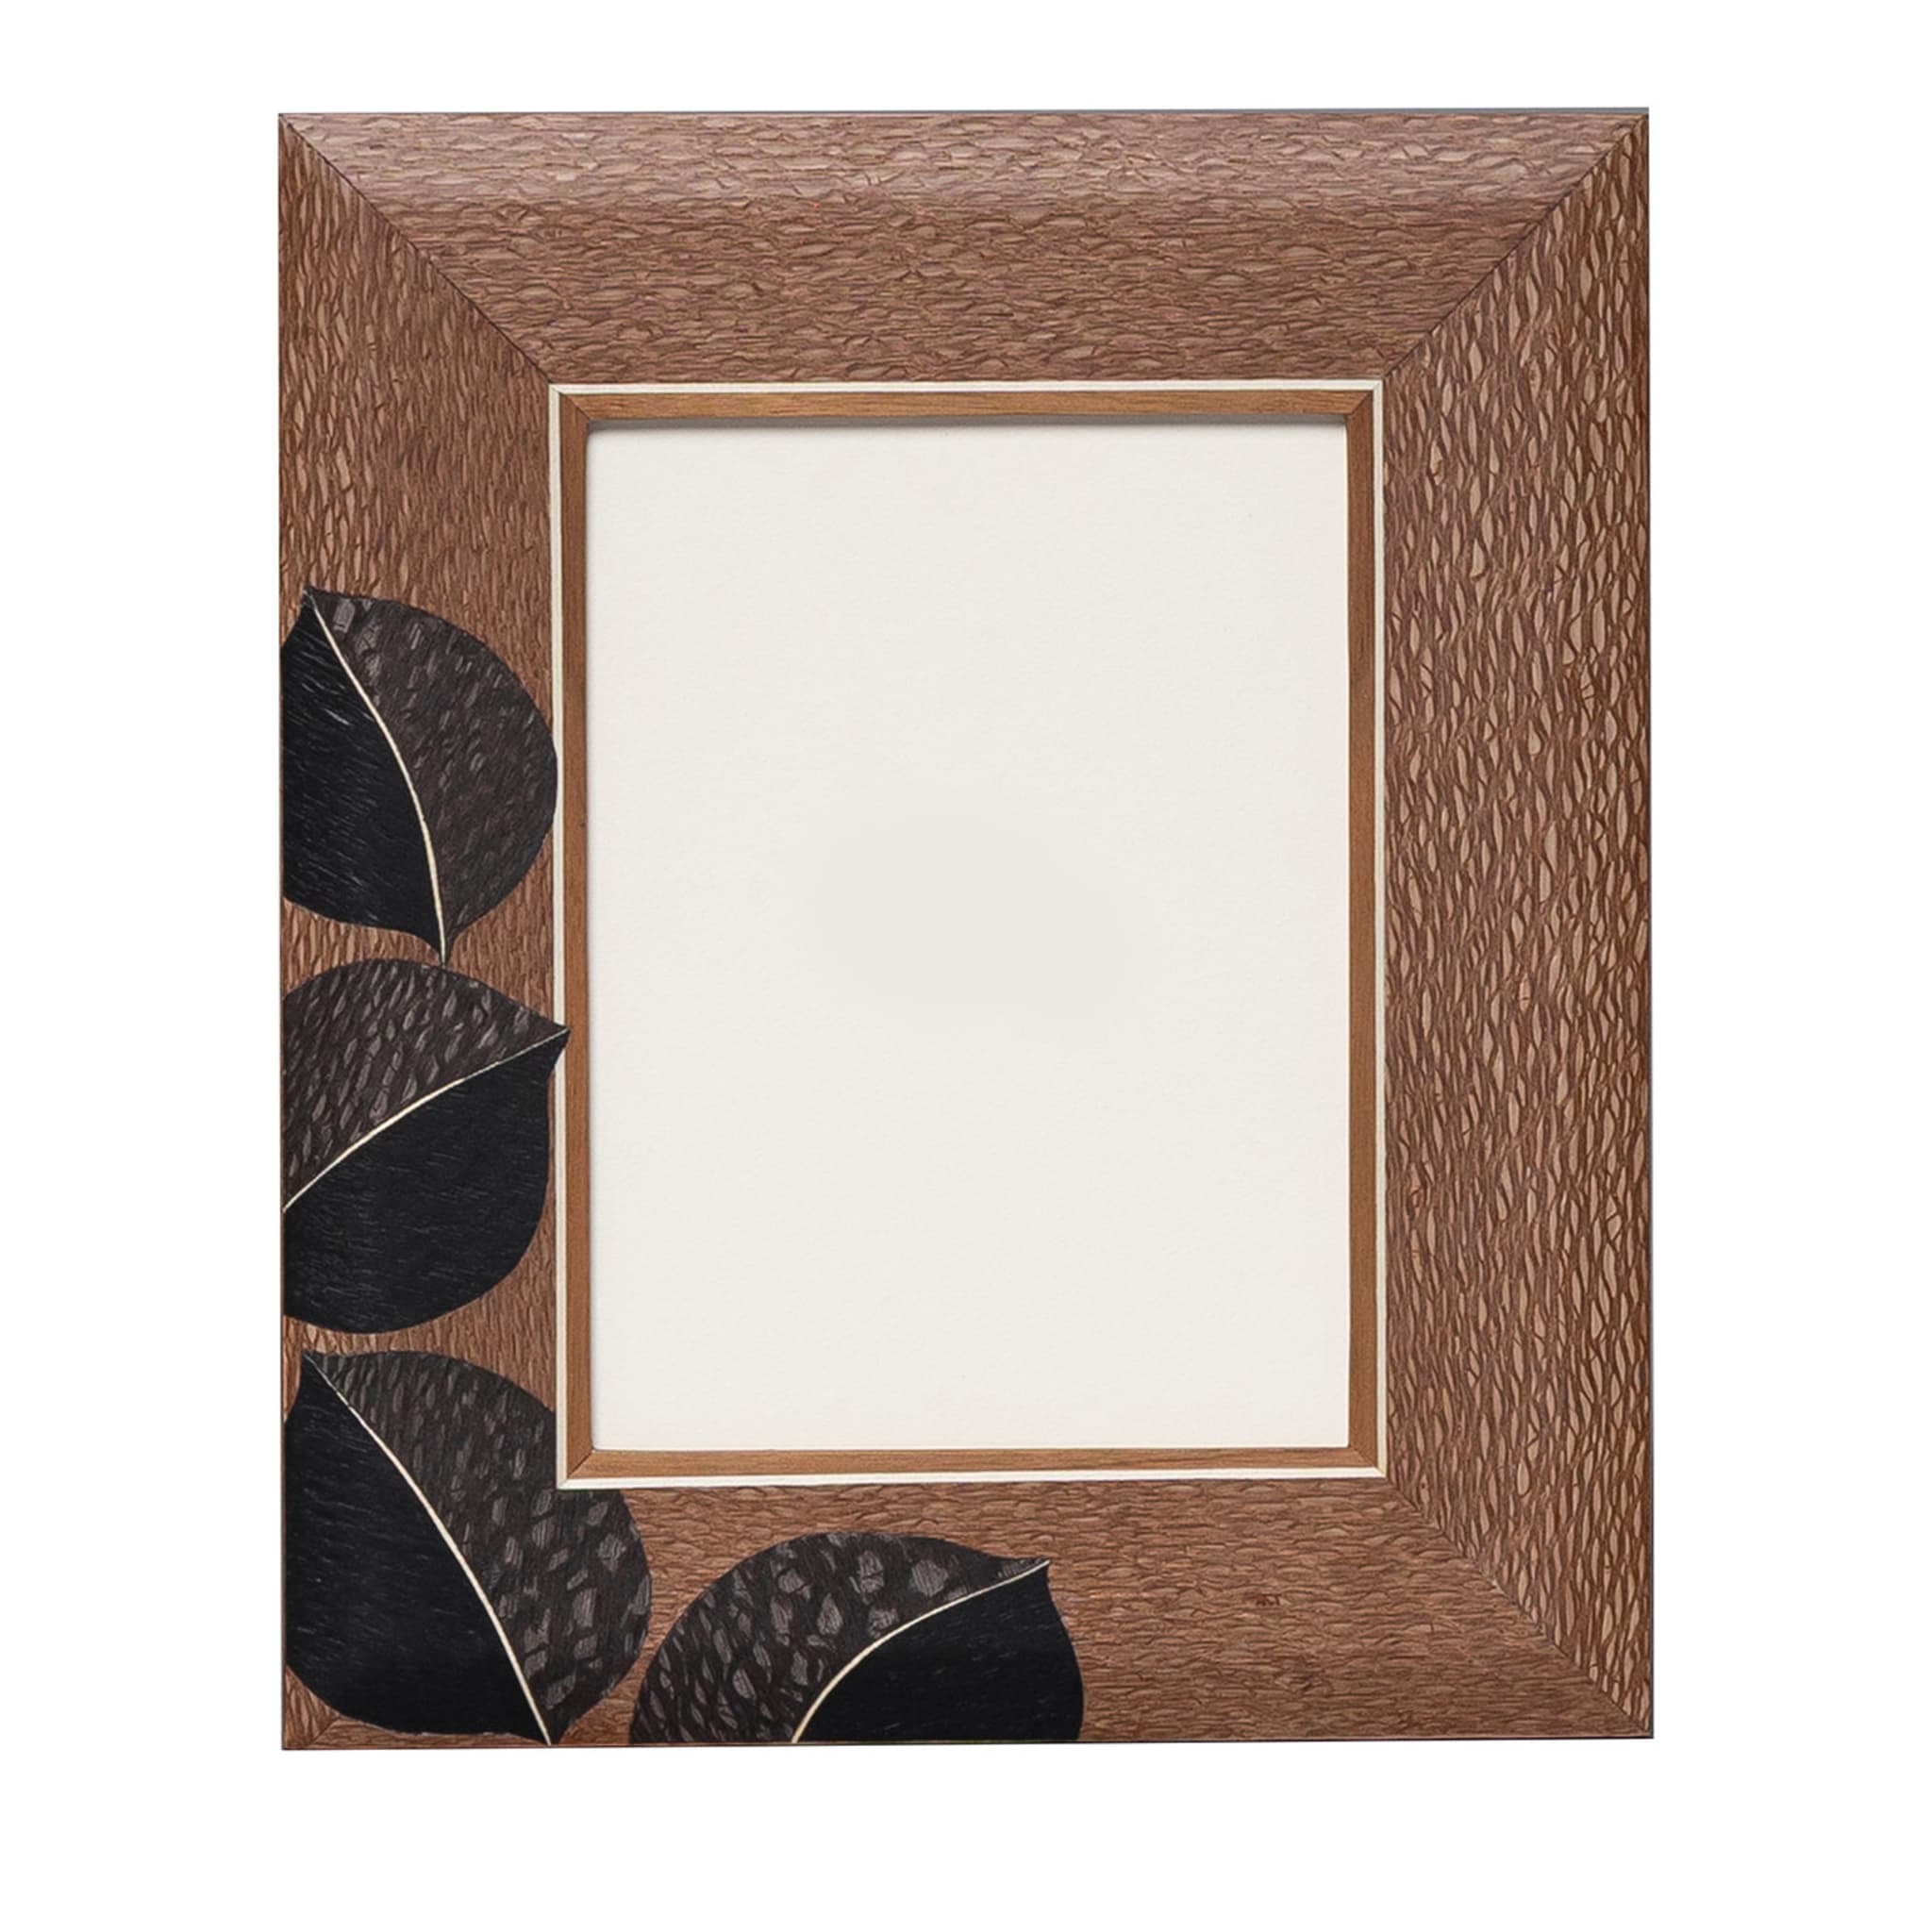 Carbalho Large Picture Frame - Main view